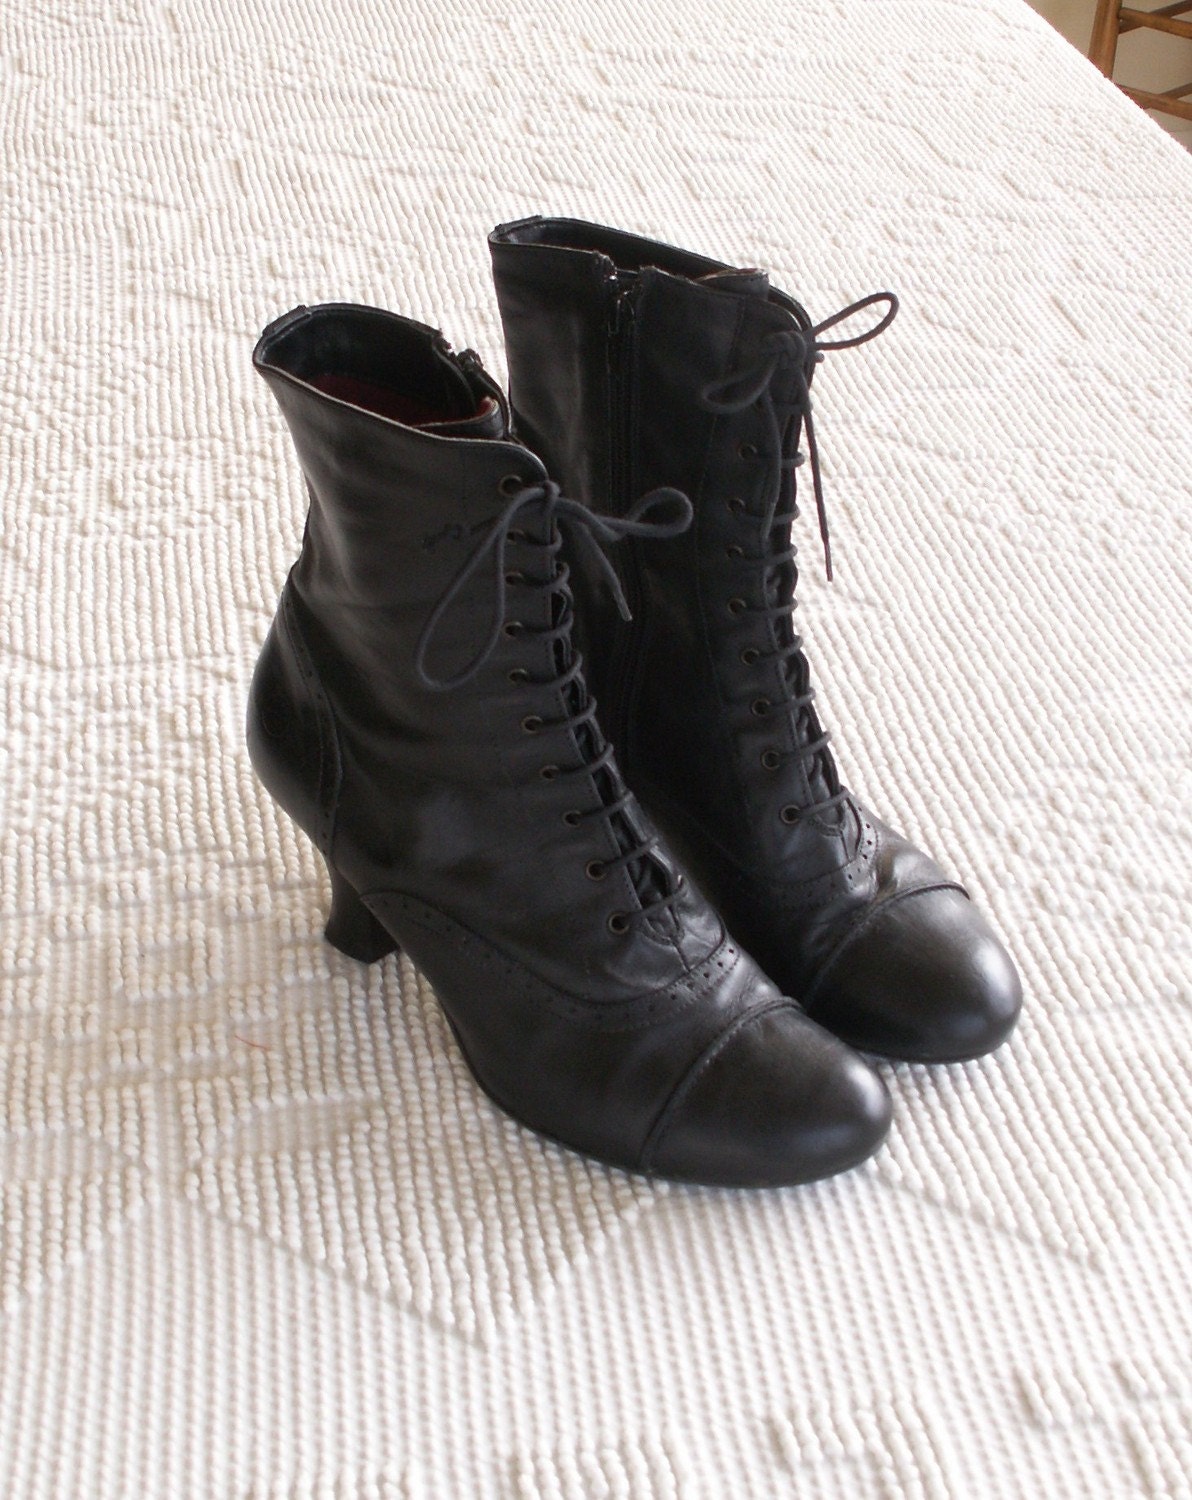 Vintage Victorian Black Leather Granny Boots by BRONX Made in